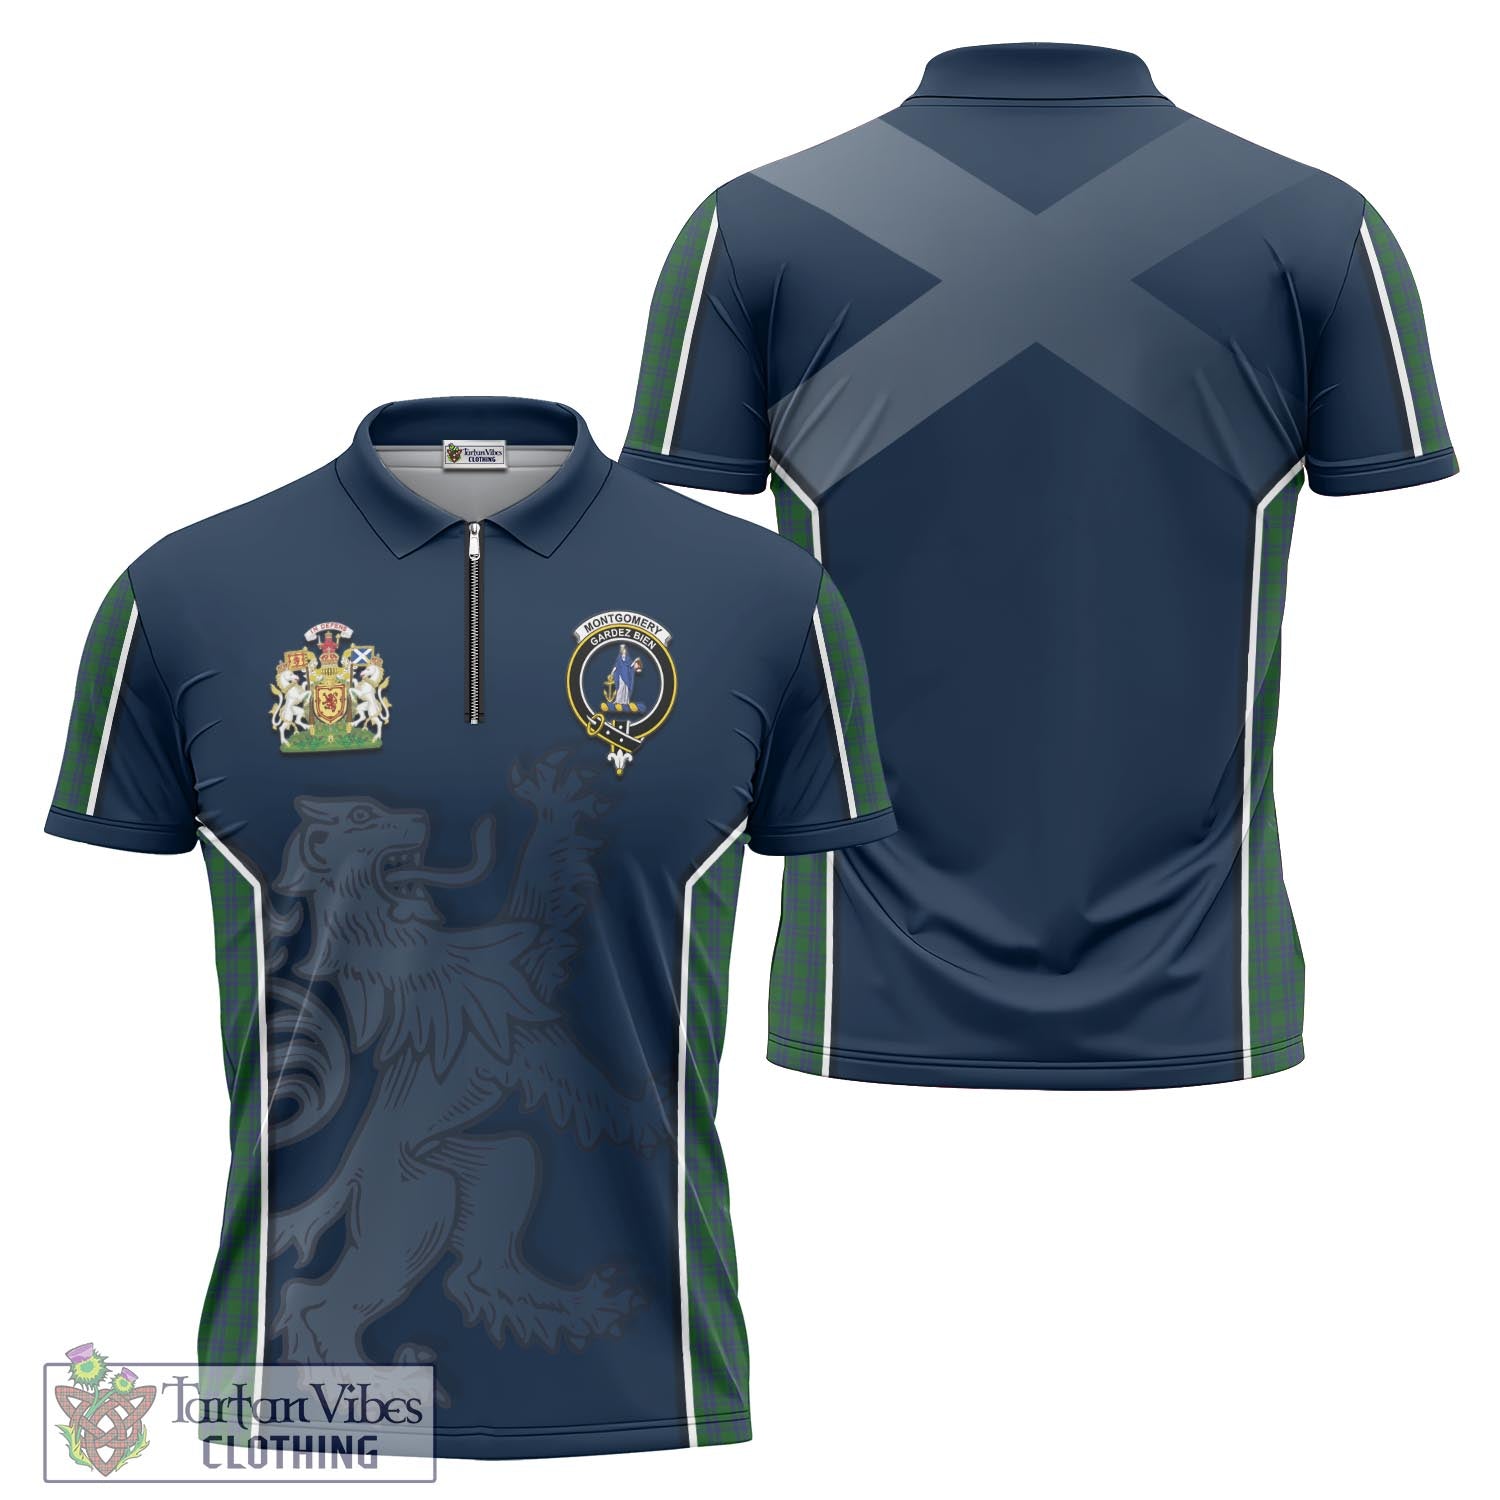 Tartan Vibes Clothing Montgomery Tartan Zipper Polo Shirt with Family Crest and Lion Rampant Vibes Sport Style